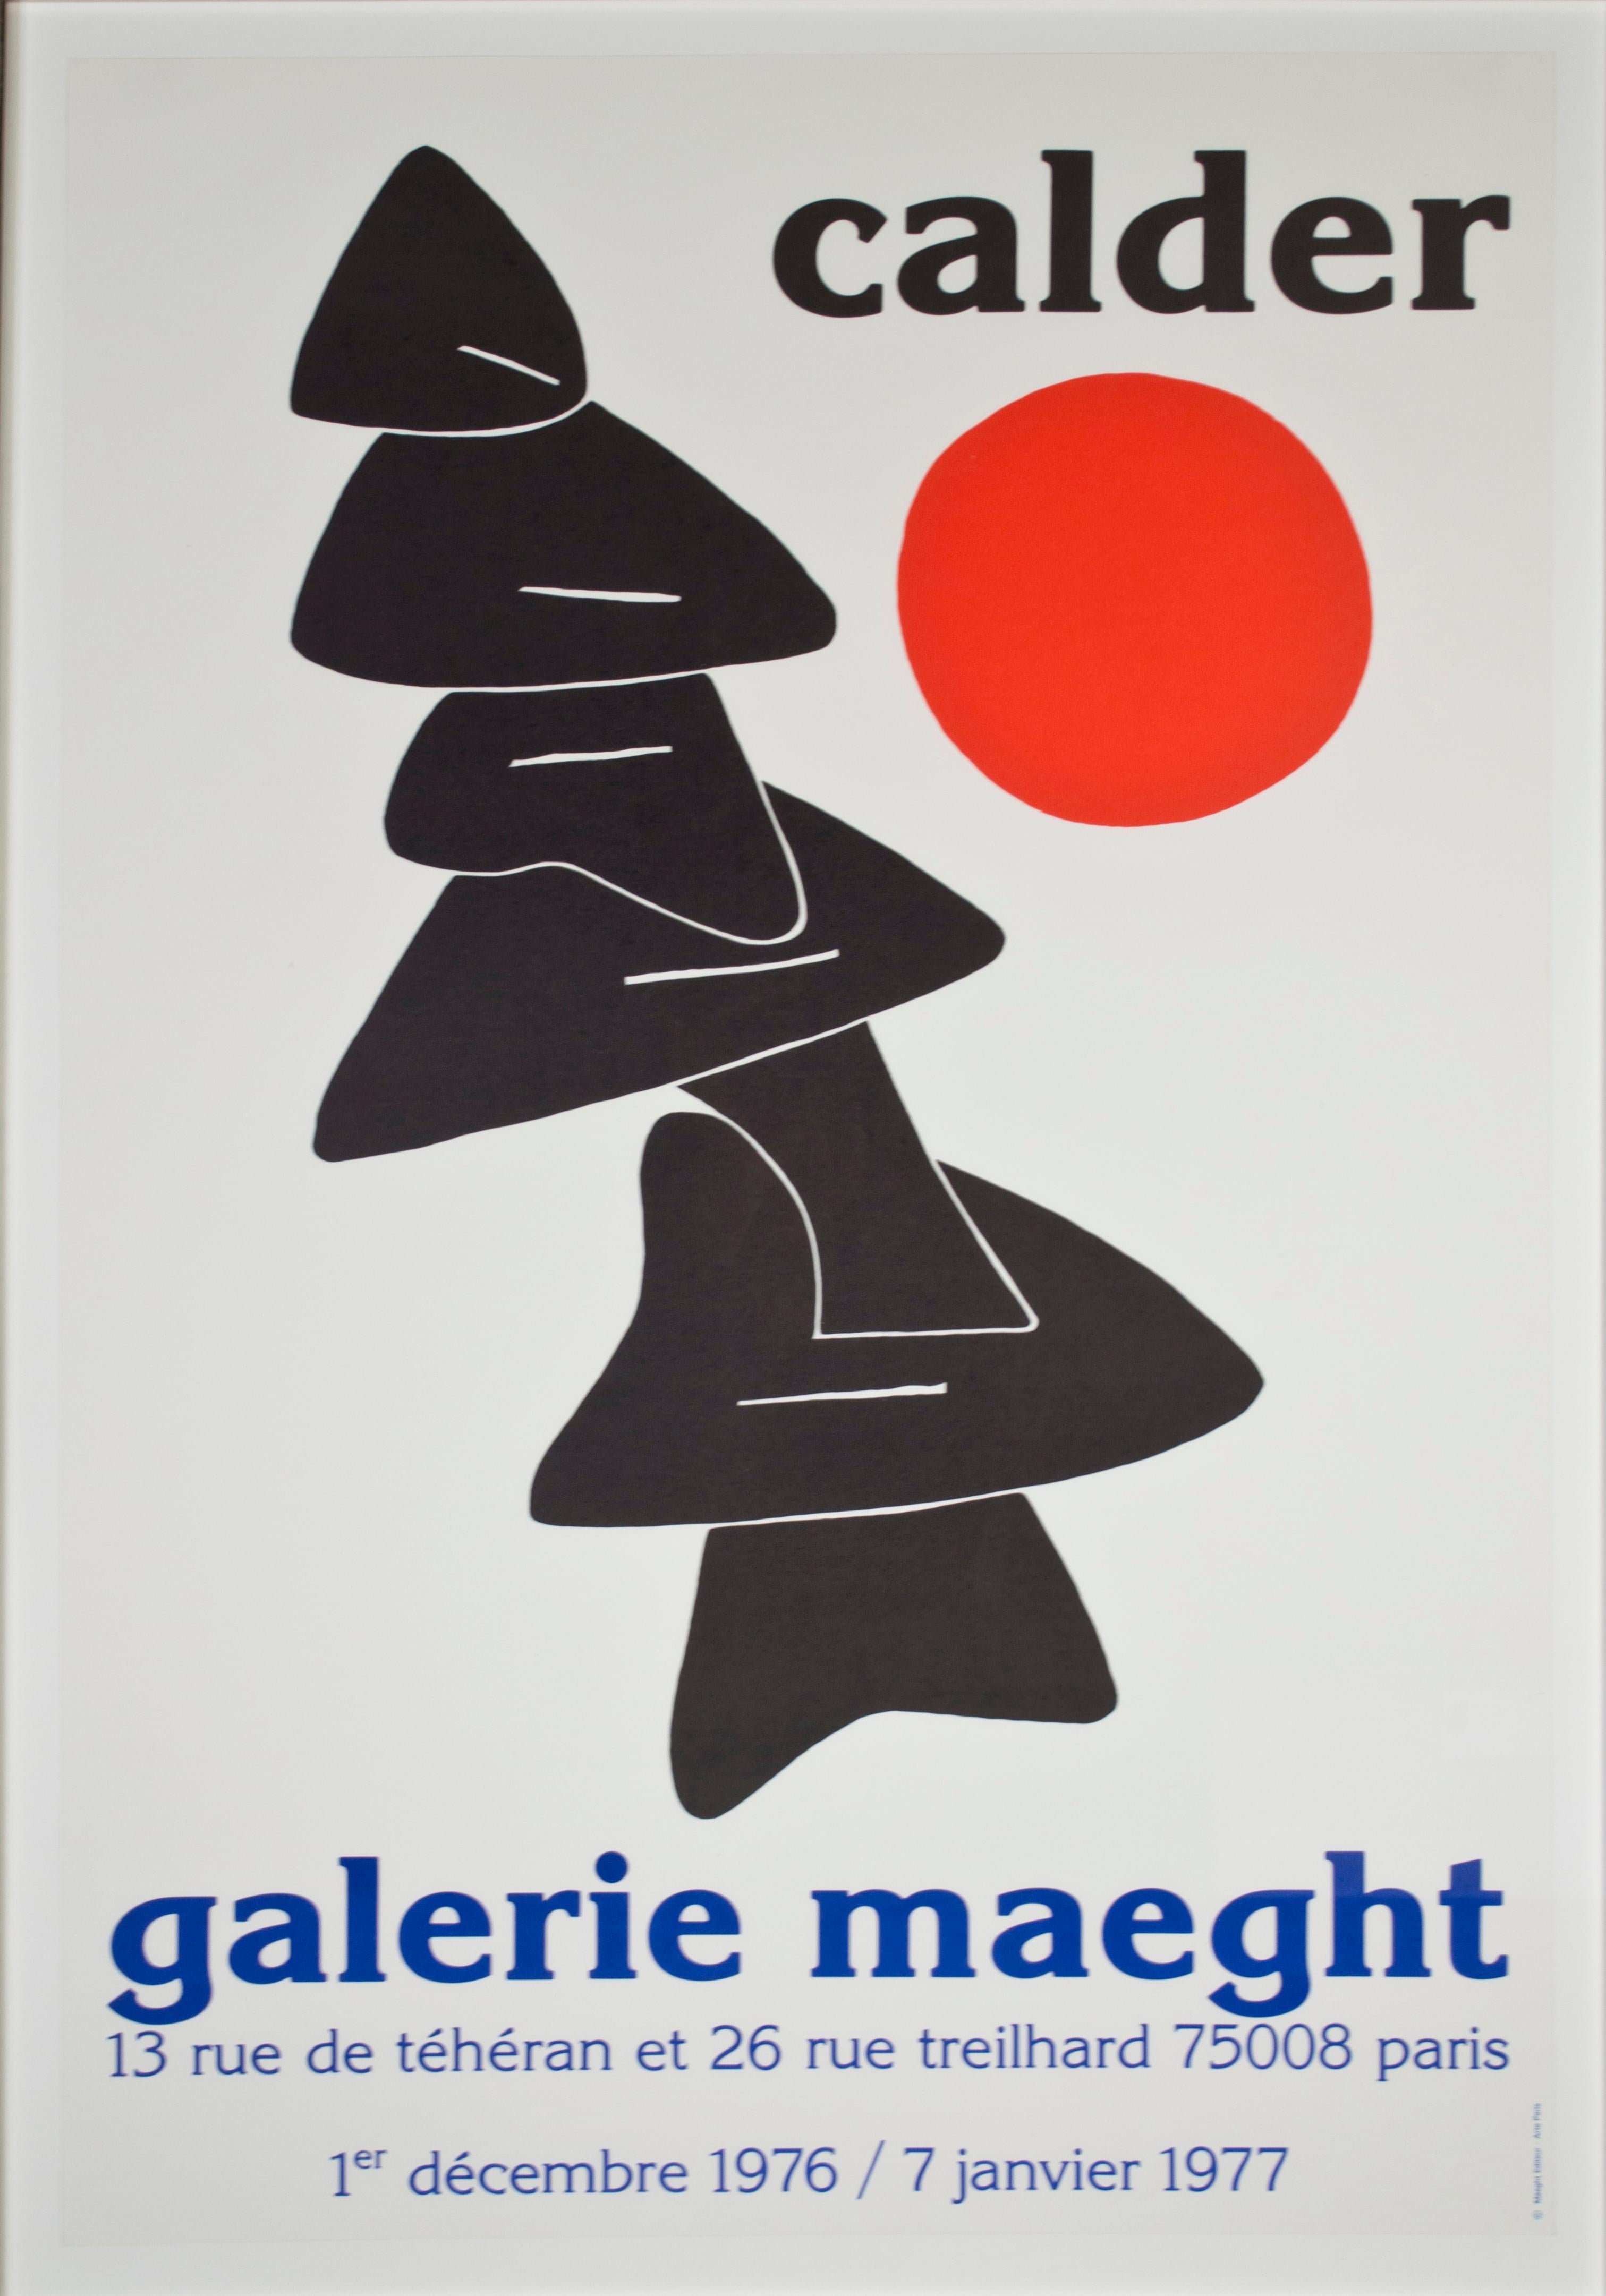 "Stabile with Red Sun Galerie Maeght, " Original Lithograph Poster by A. Calder